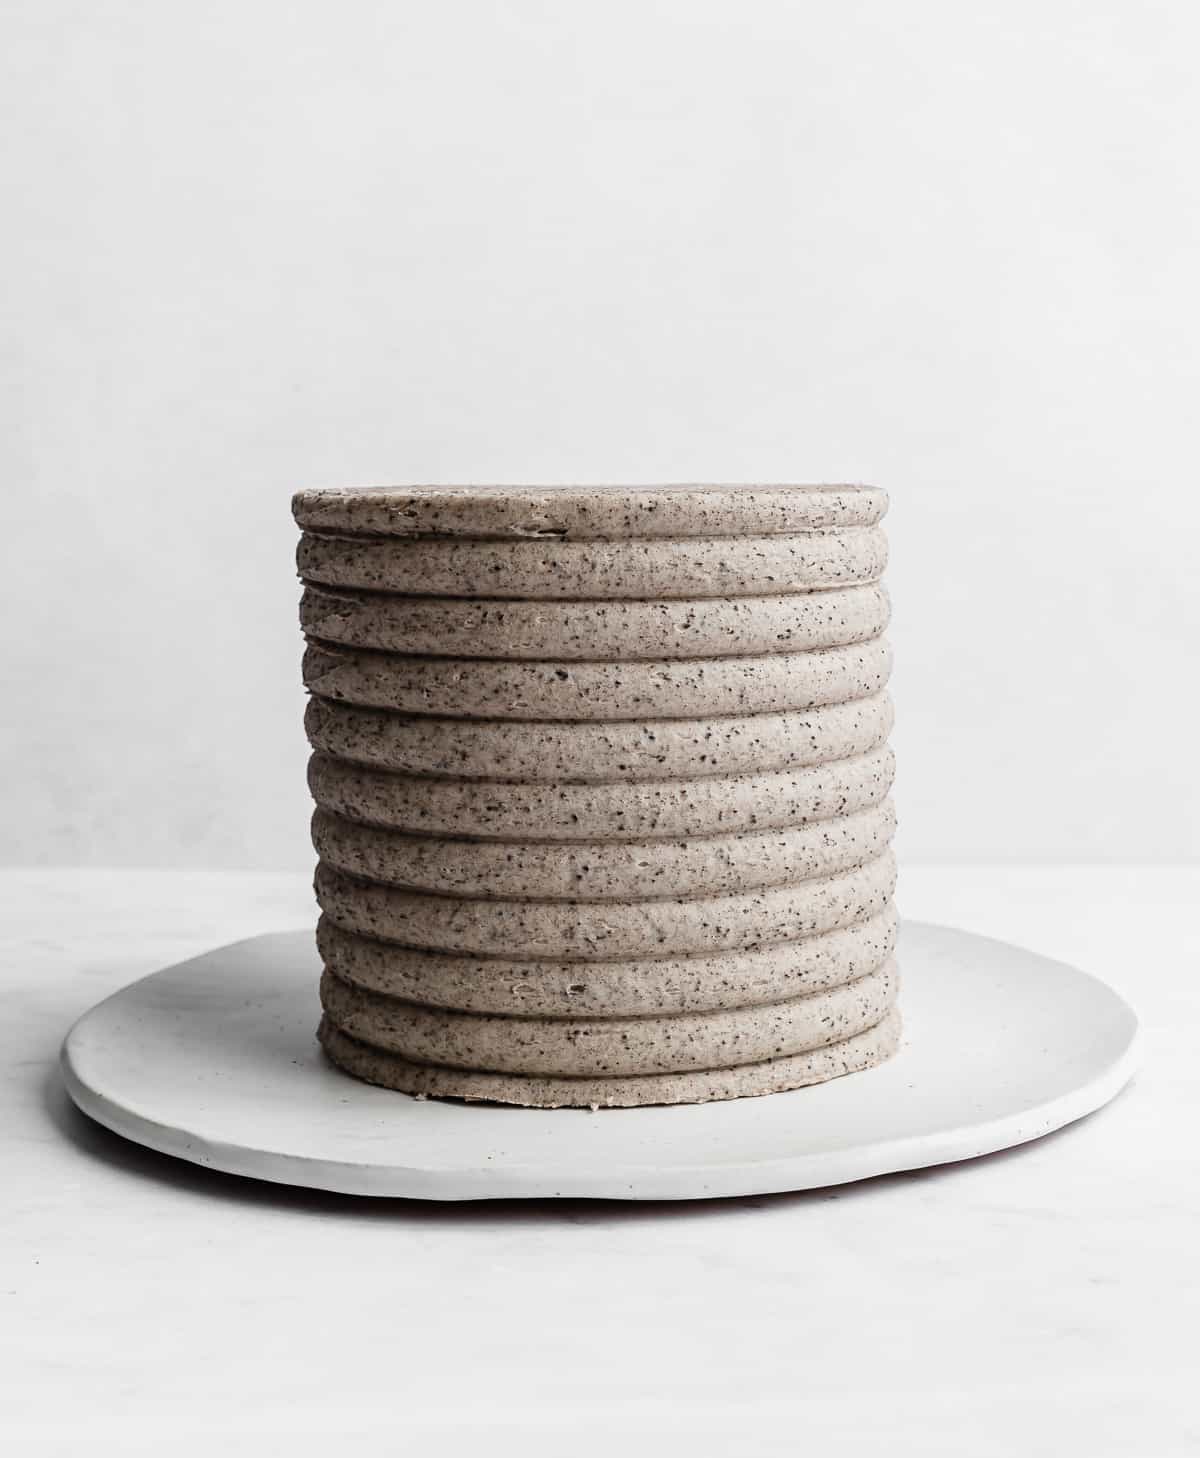 A cookies and cream frosting coated cake on a white background.